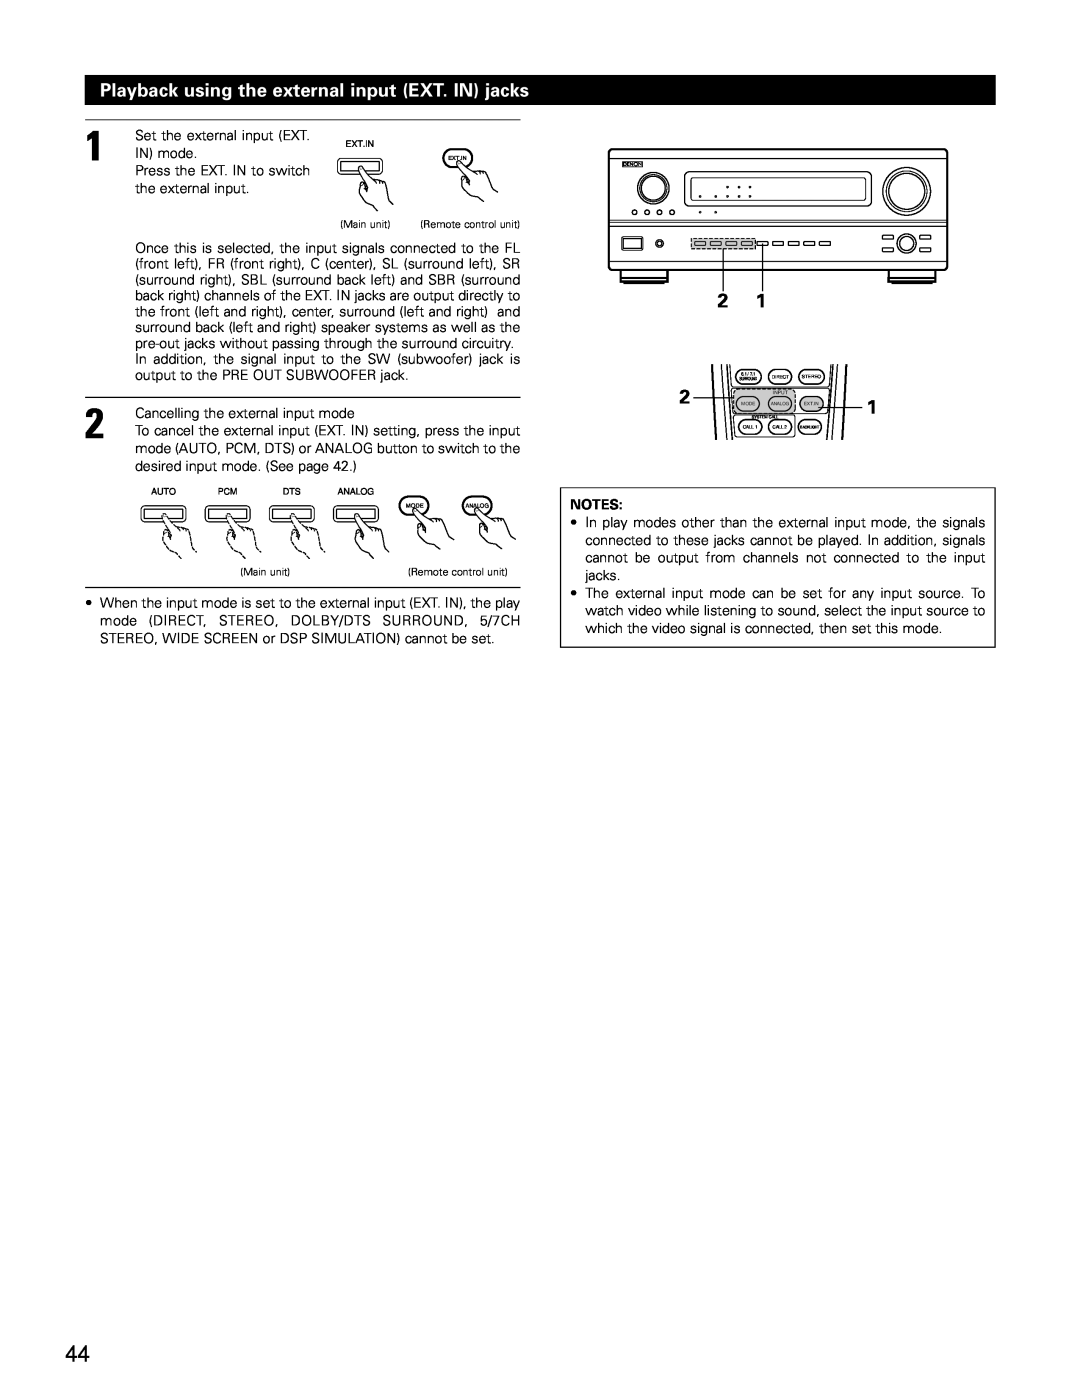 Denon AVR-3802 manual Playback using the external input EXT. IN jacks 